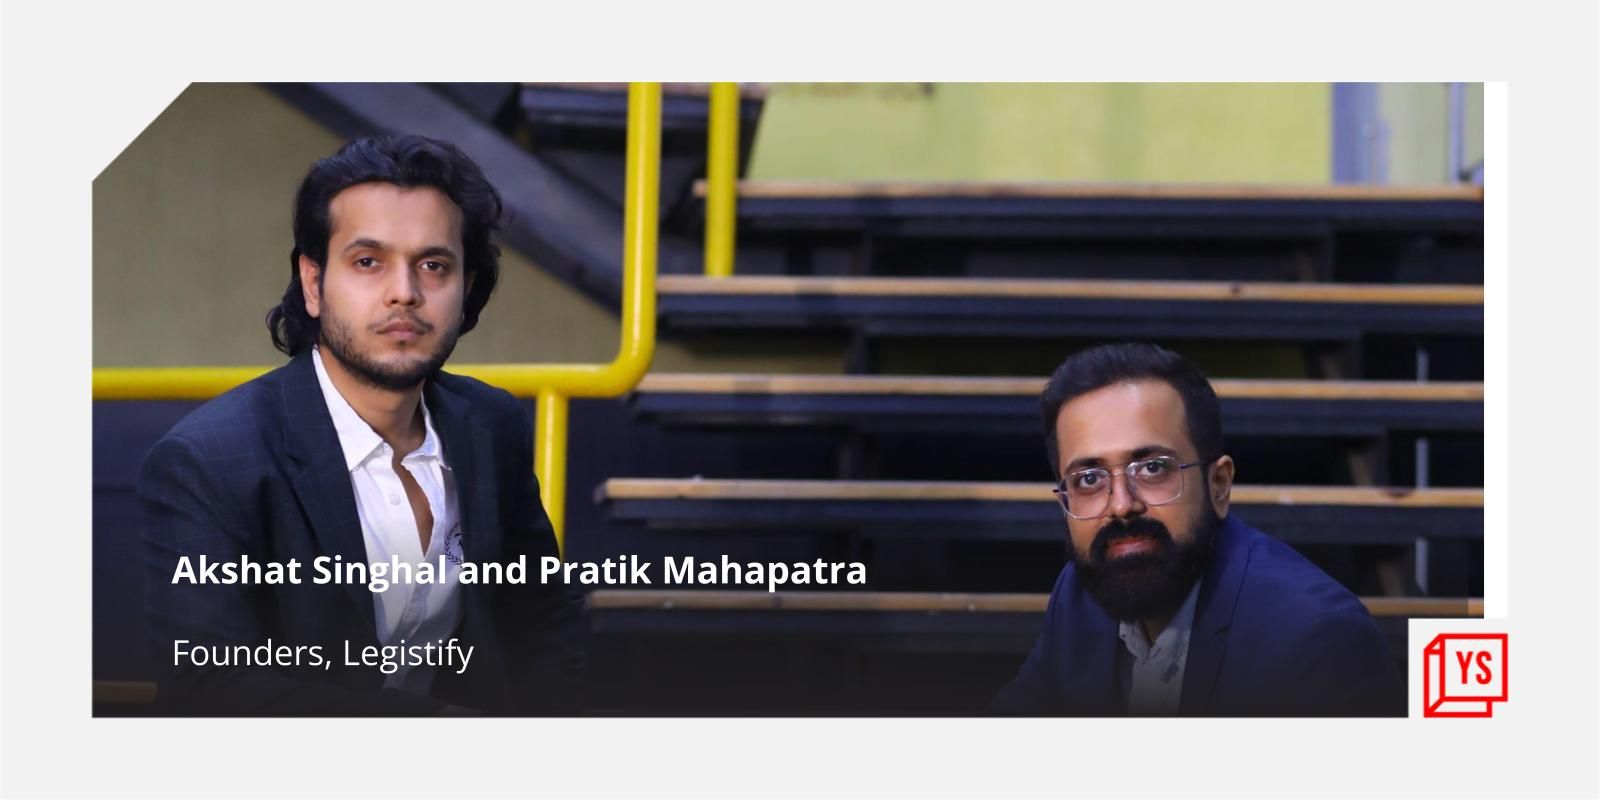 Why a BITS Pilani grad and corporate lawyer teamed up to launch a legal tech startup